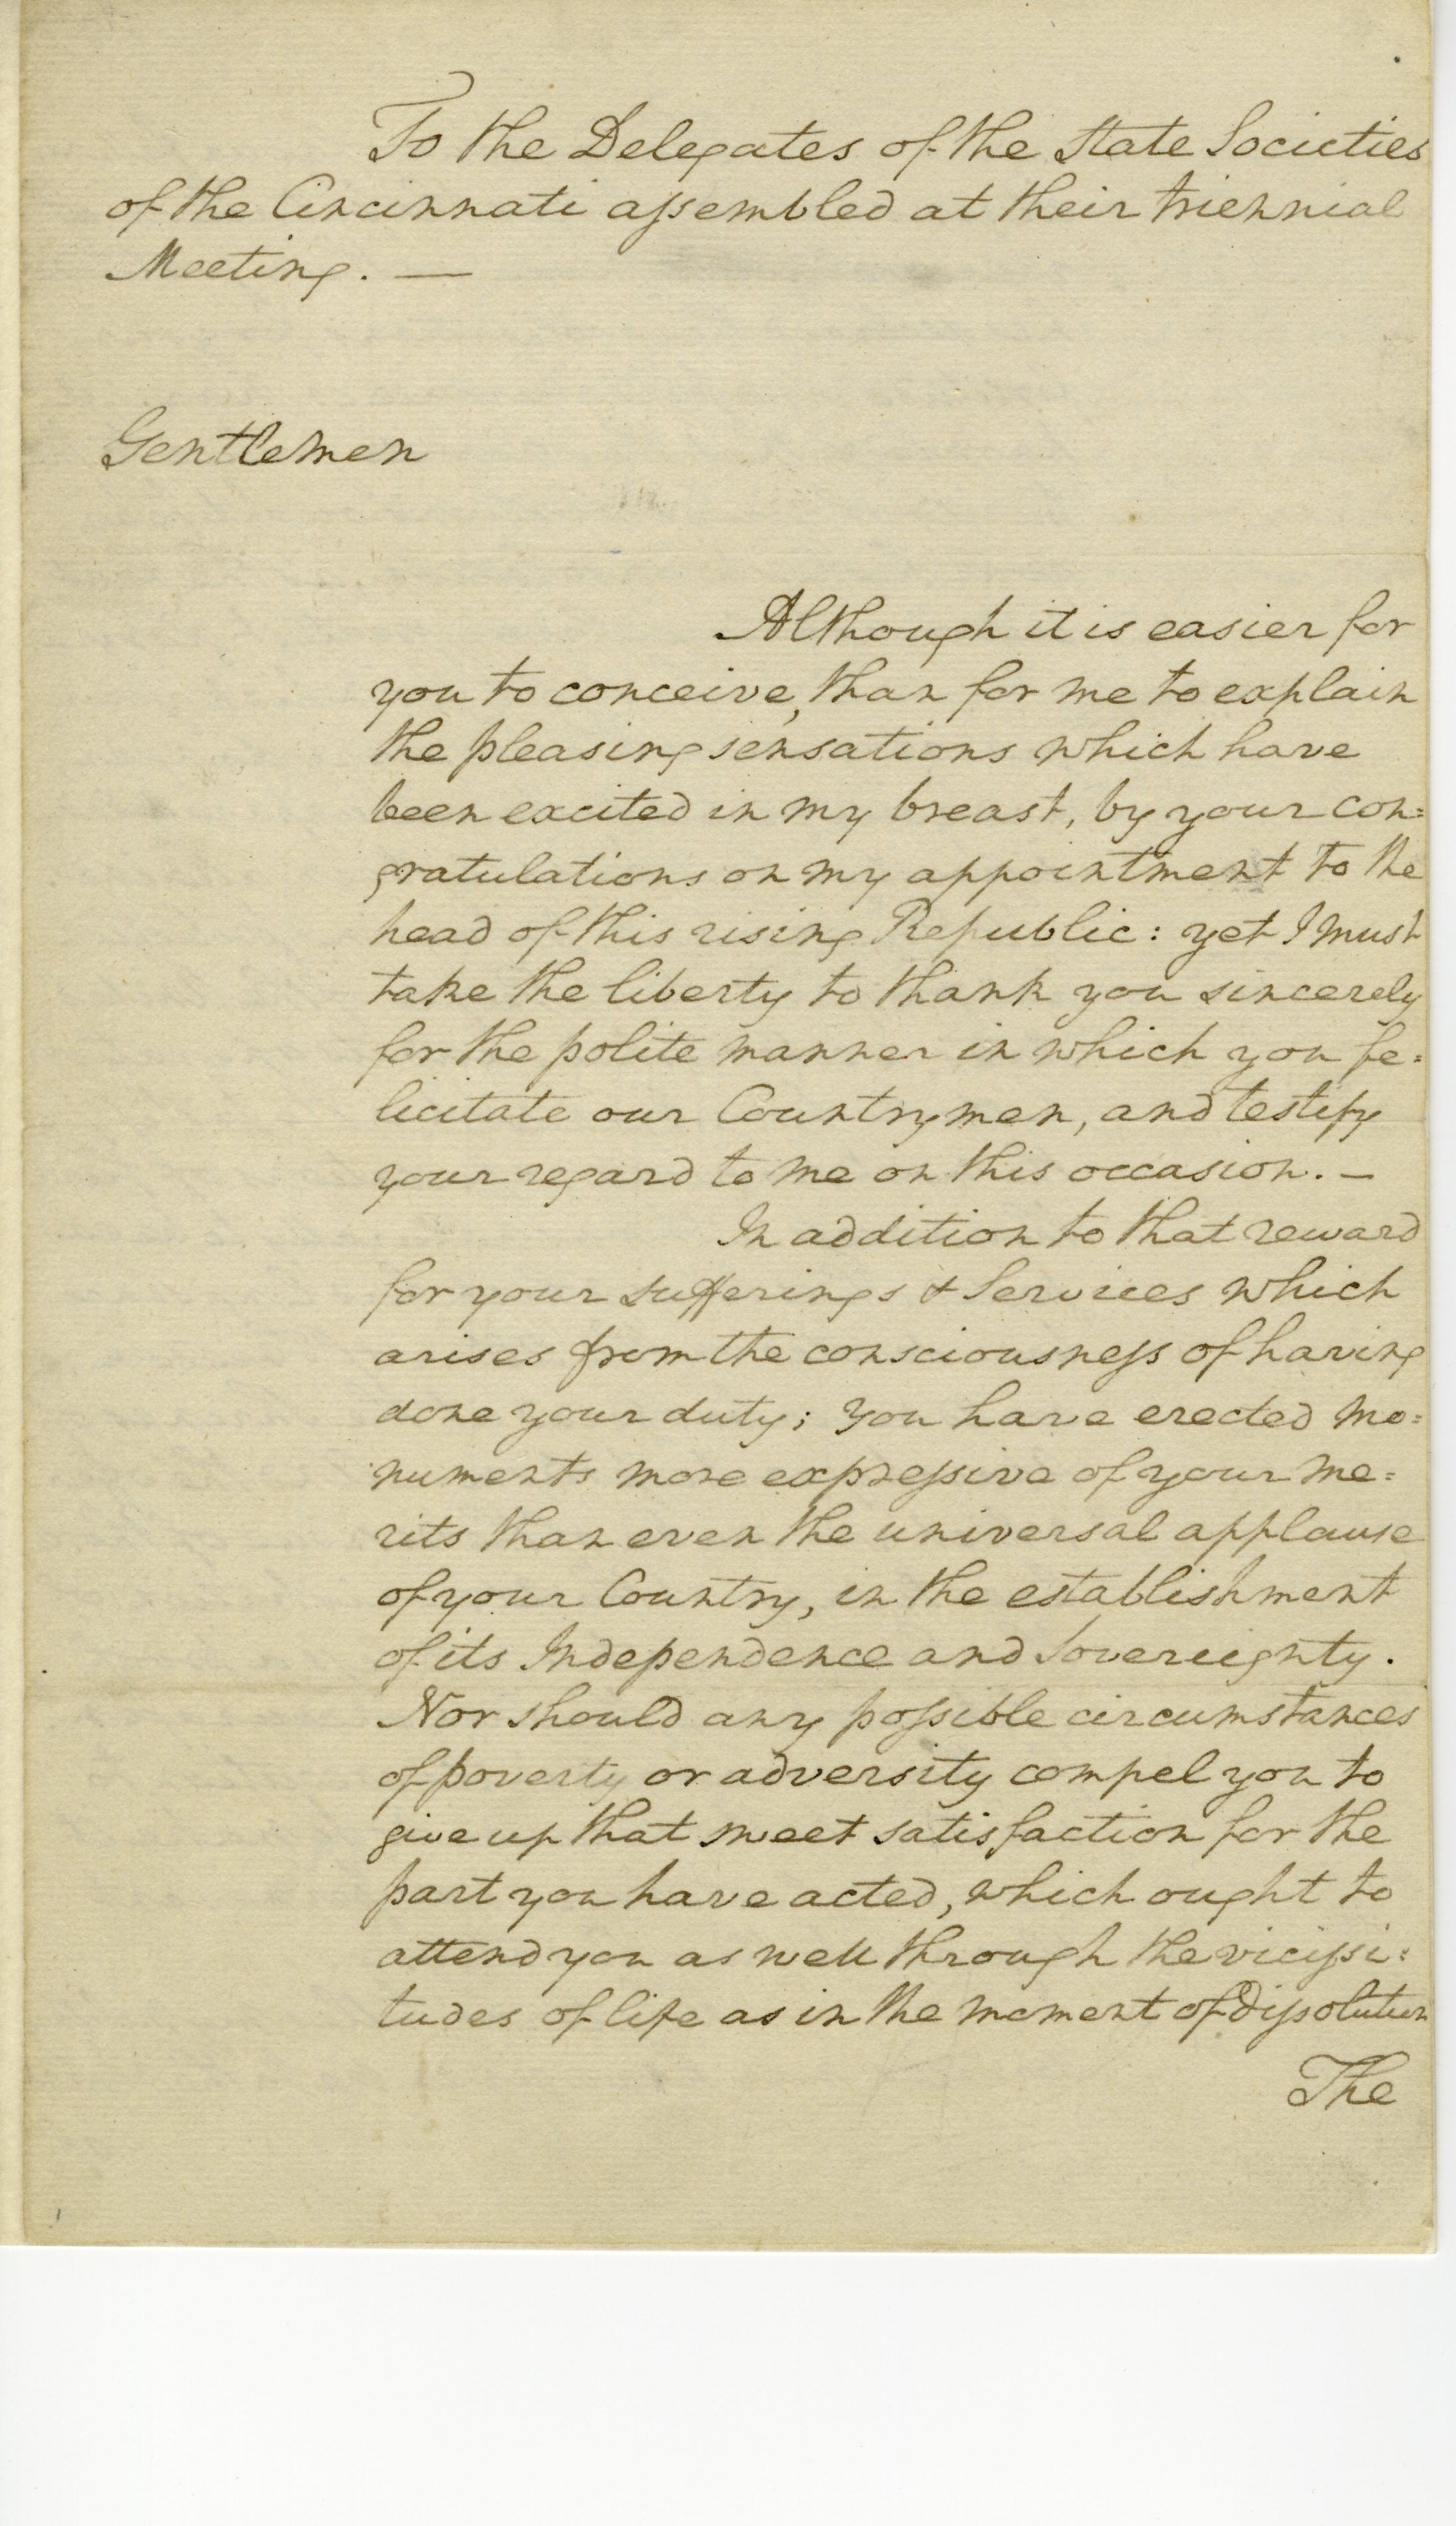 George Washington to the Delegates of the State Societies of the Cincinnati, May 1790